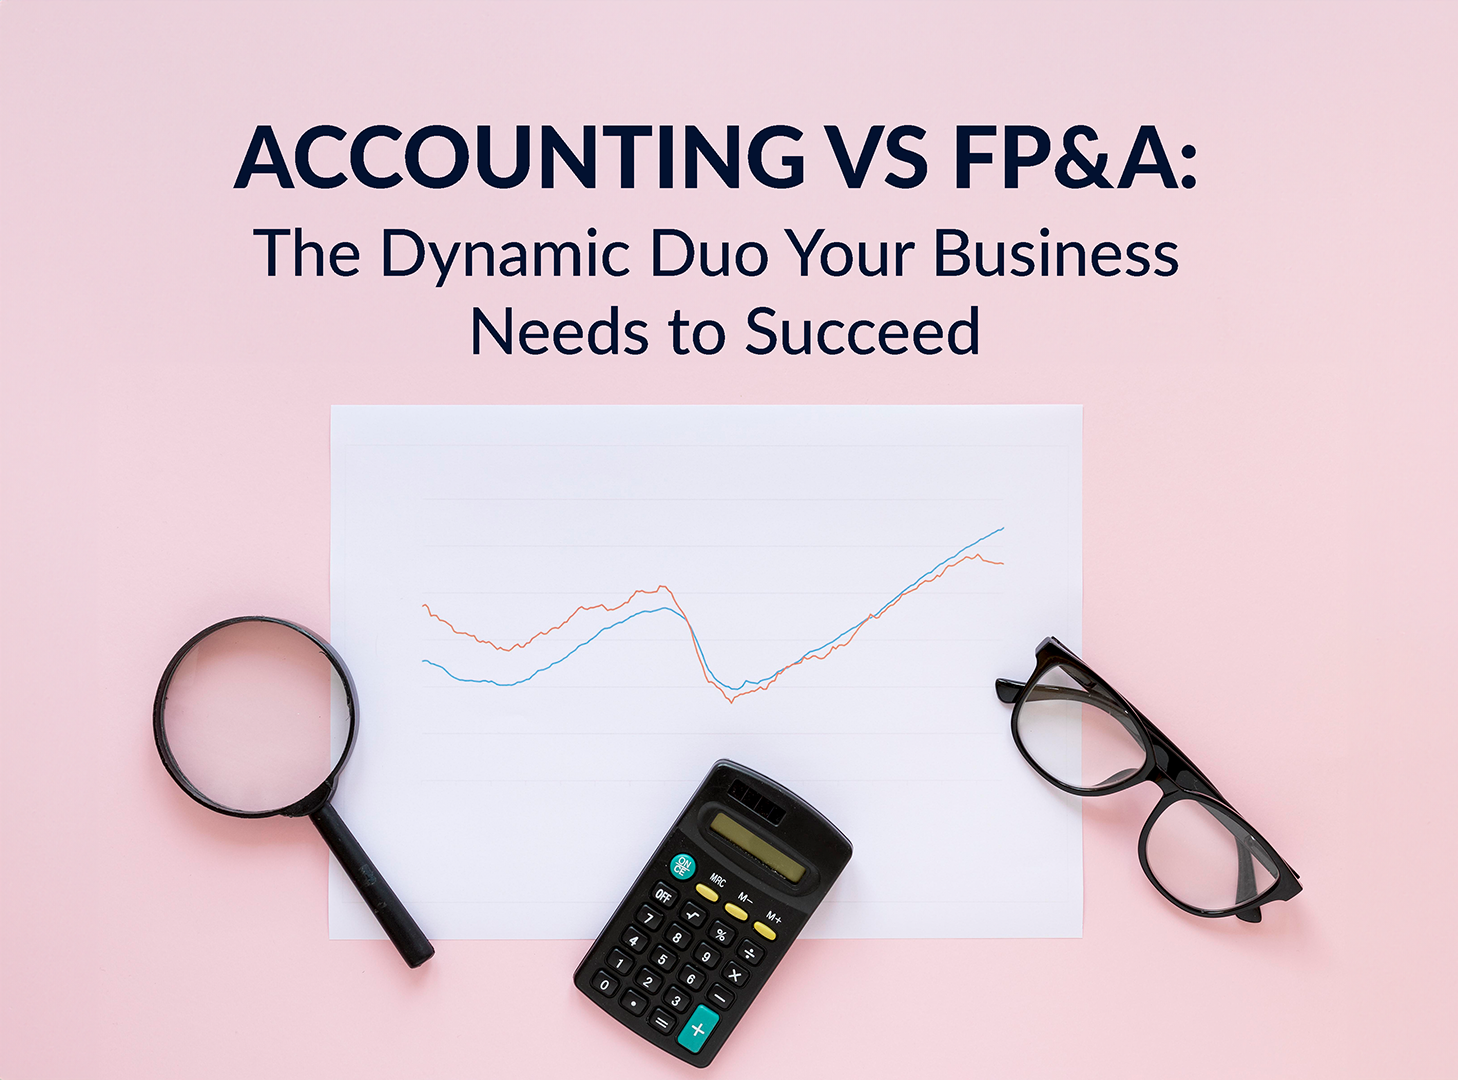 FP&A vs Accounting: The Dynamic Duo Your Business Needs to Succeed